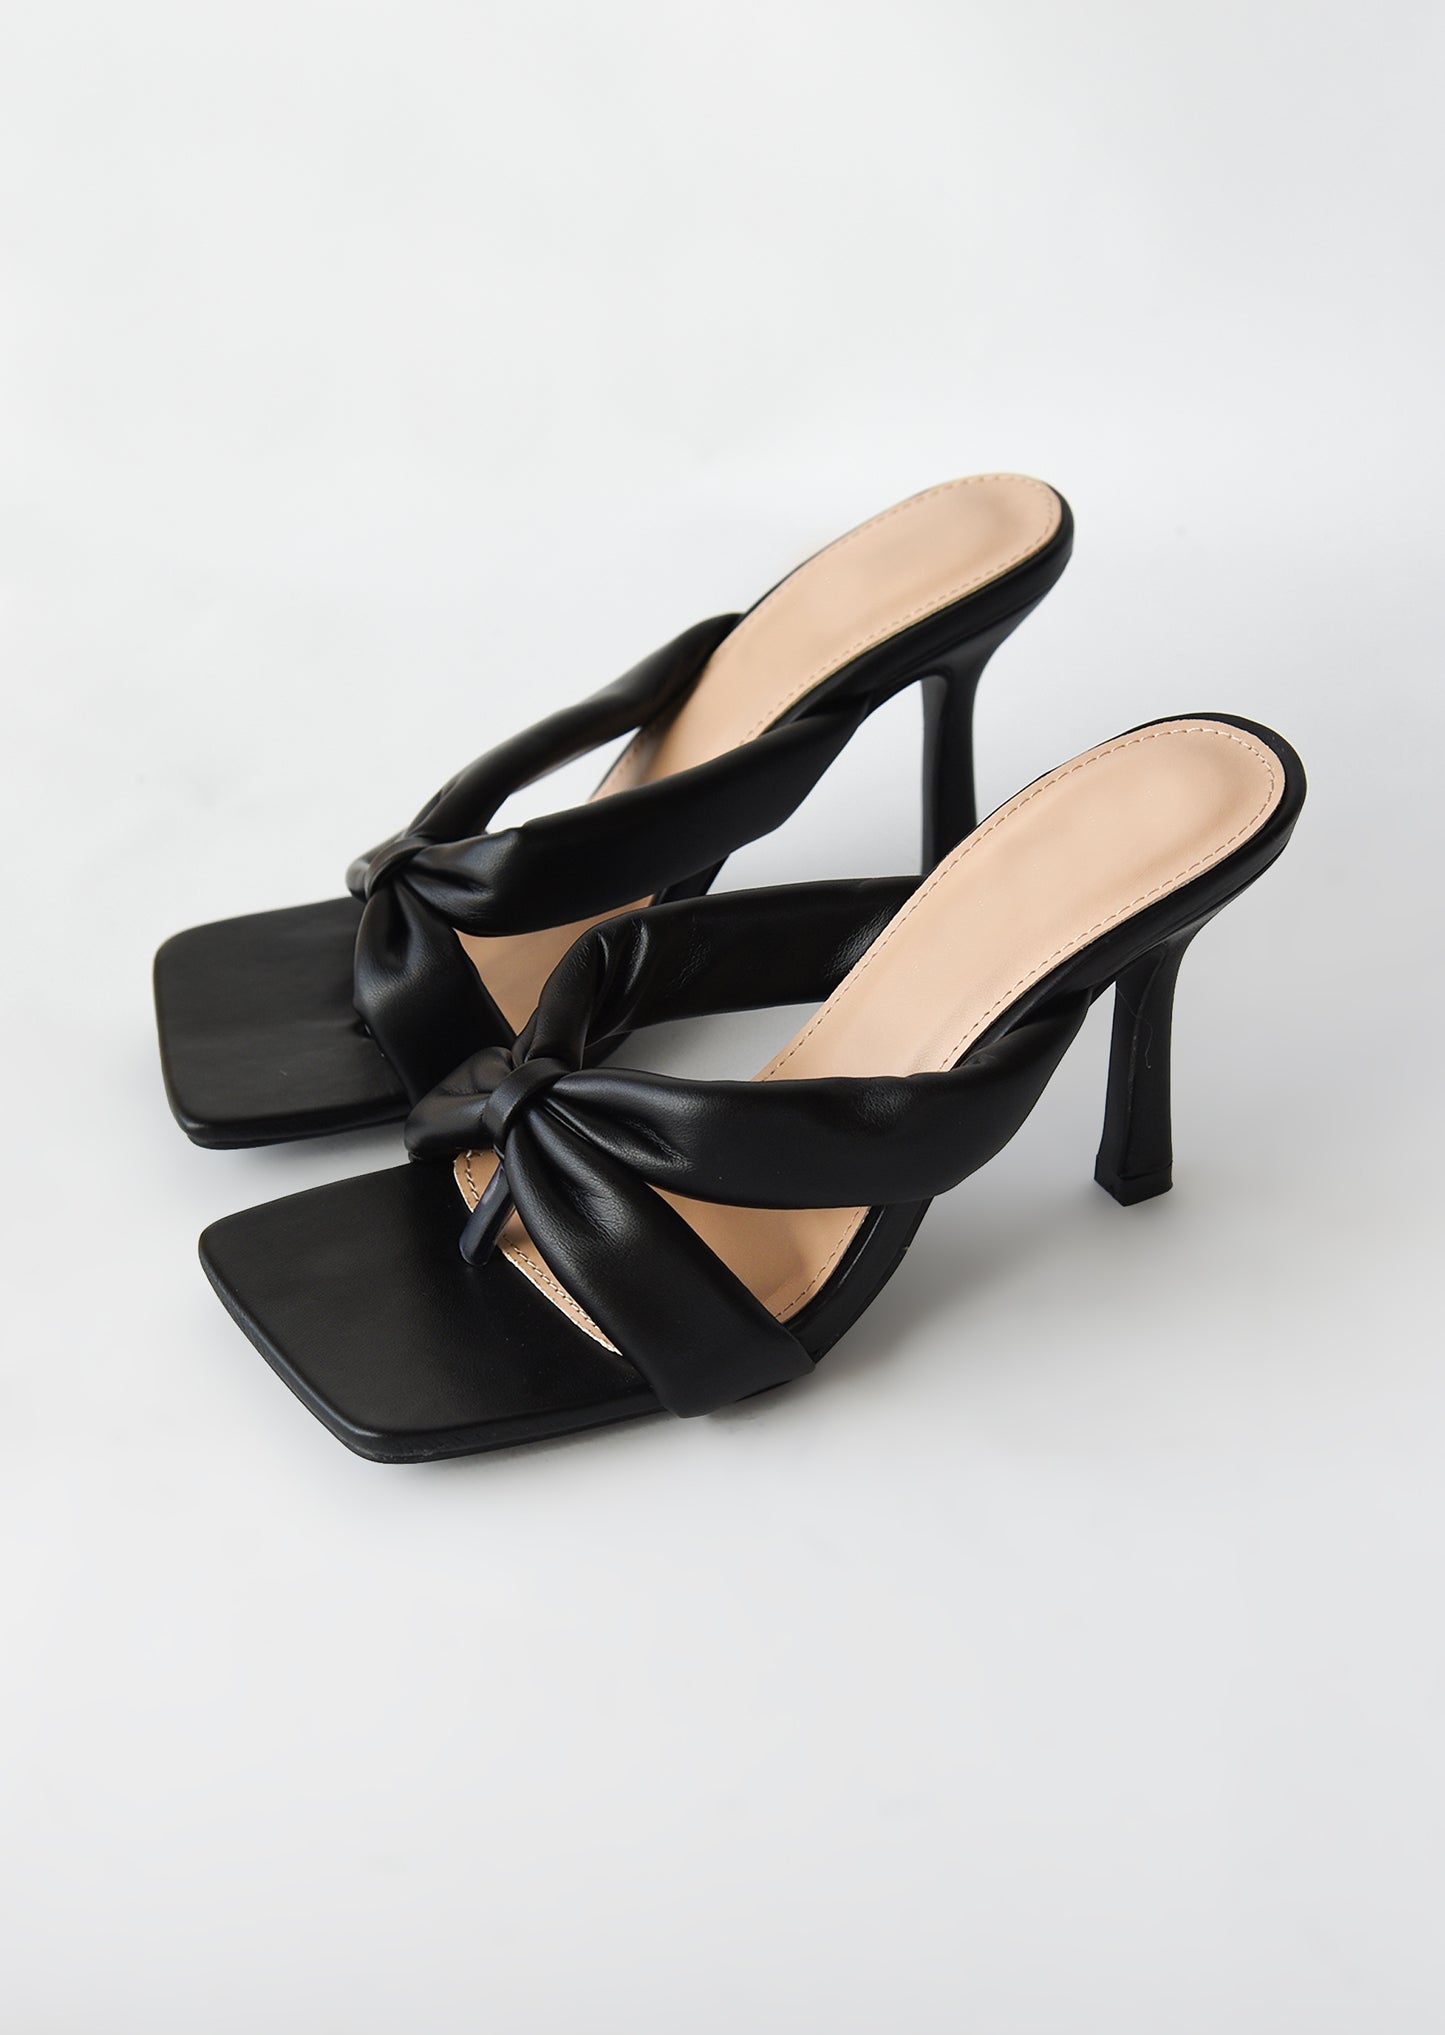 Toe thong heeled sandals in black